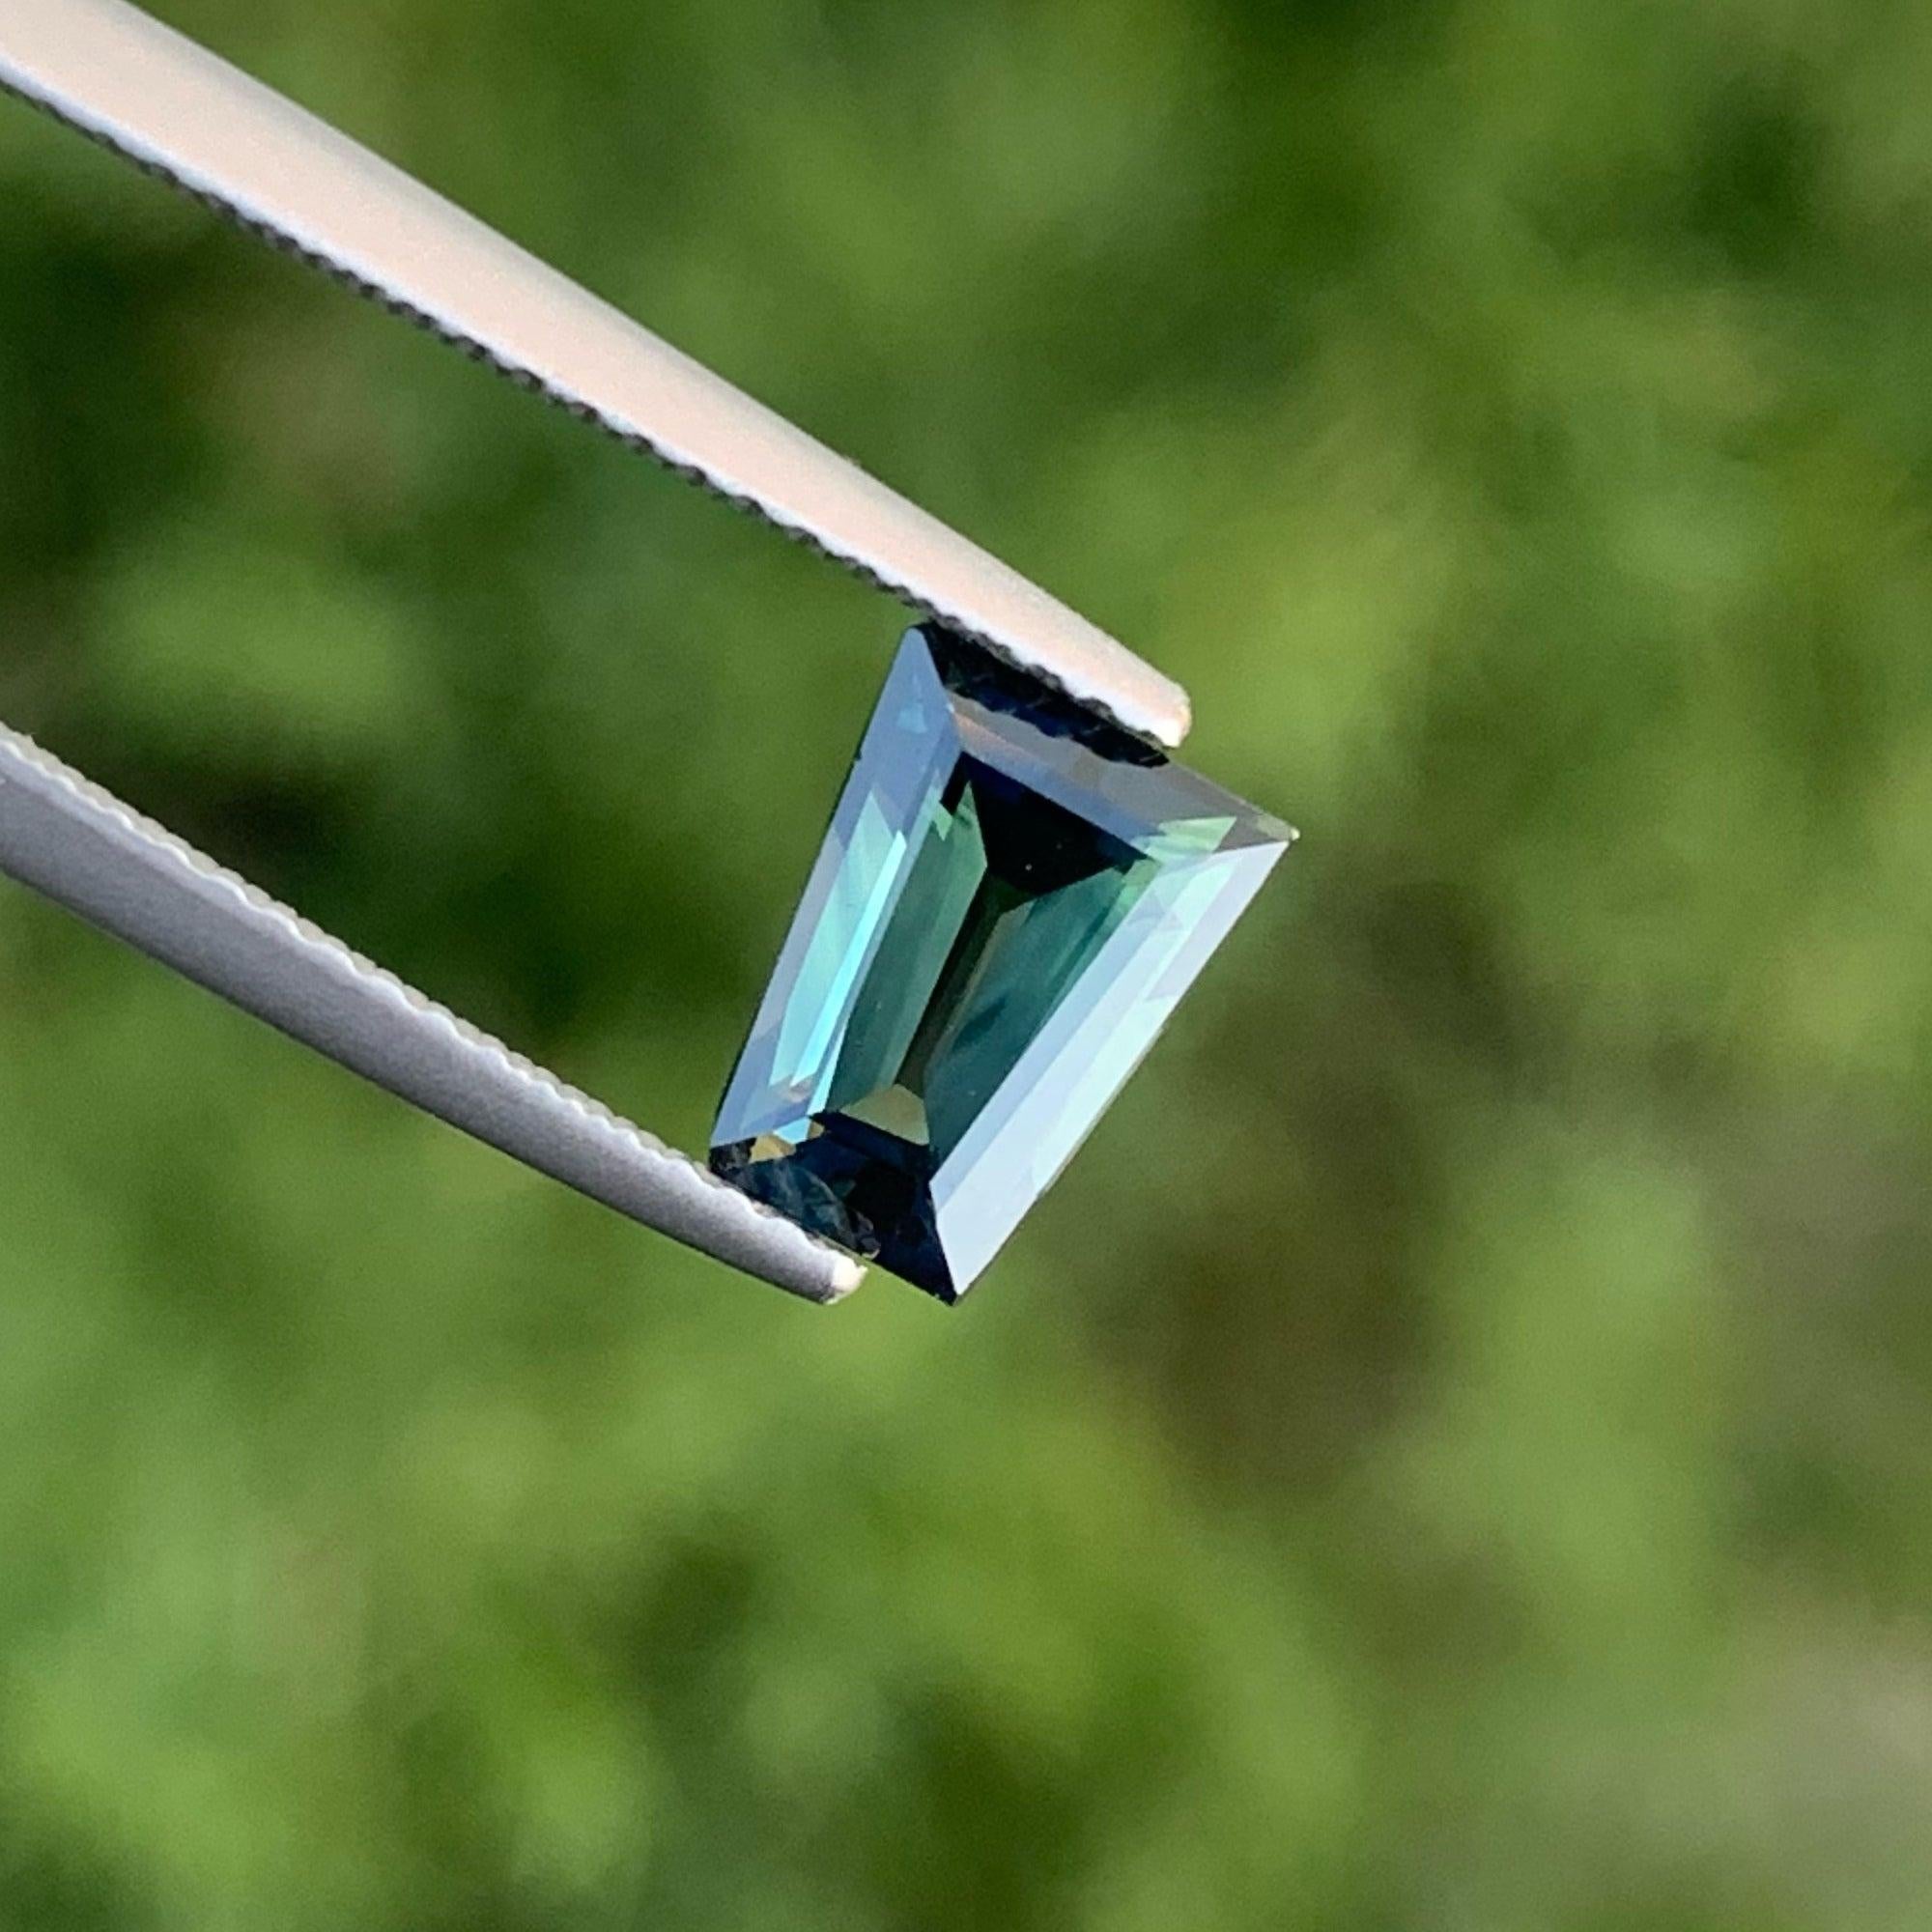 Trapezoid Cut Parti Sapphire Gemstone, Available For Sale At Wholesale Price Natural High Quality Eye Clean Clarity 1.85 Carats Unheated Sapphire From Madagascar.

Product Information:
GEMSTONE TYPE: Trapezoid Cut Parti Sapphire Gemstone
WEIGHT: